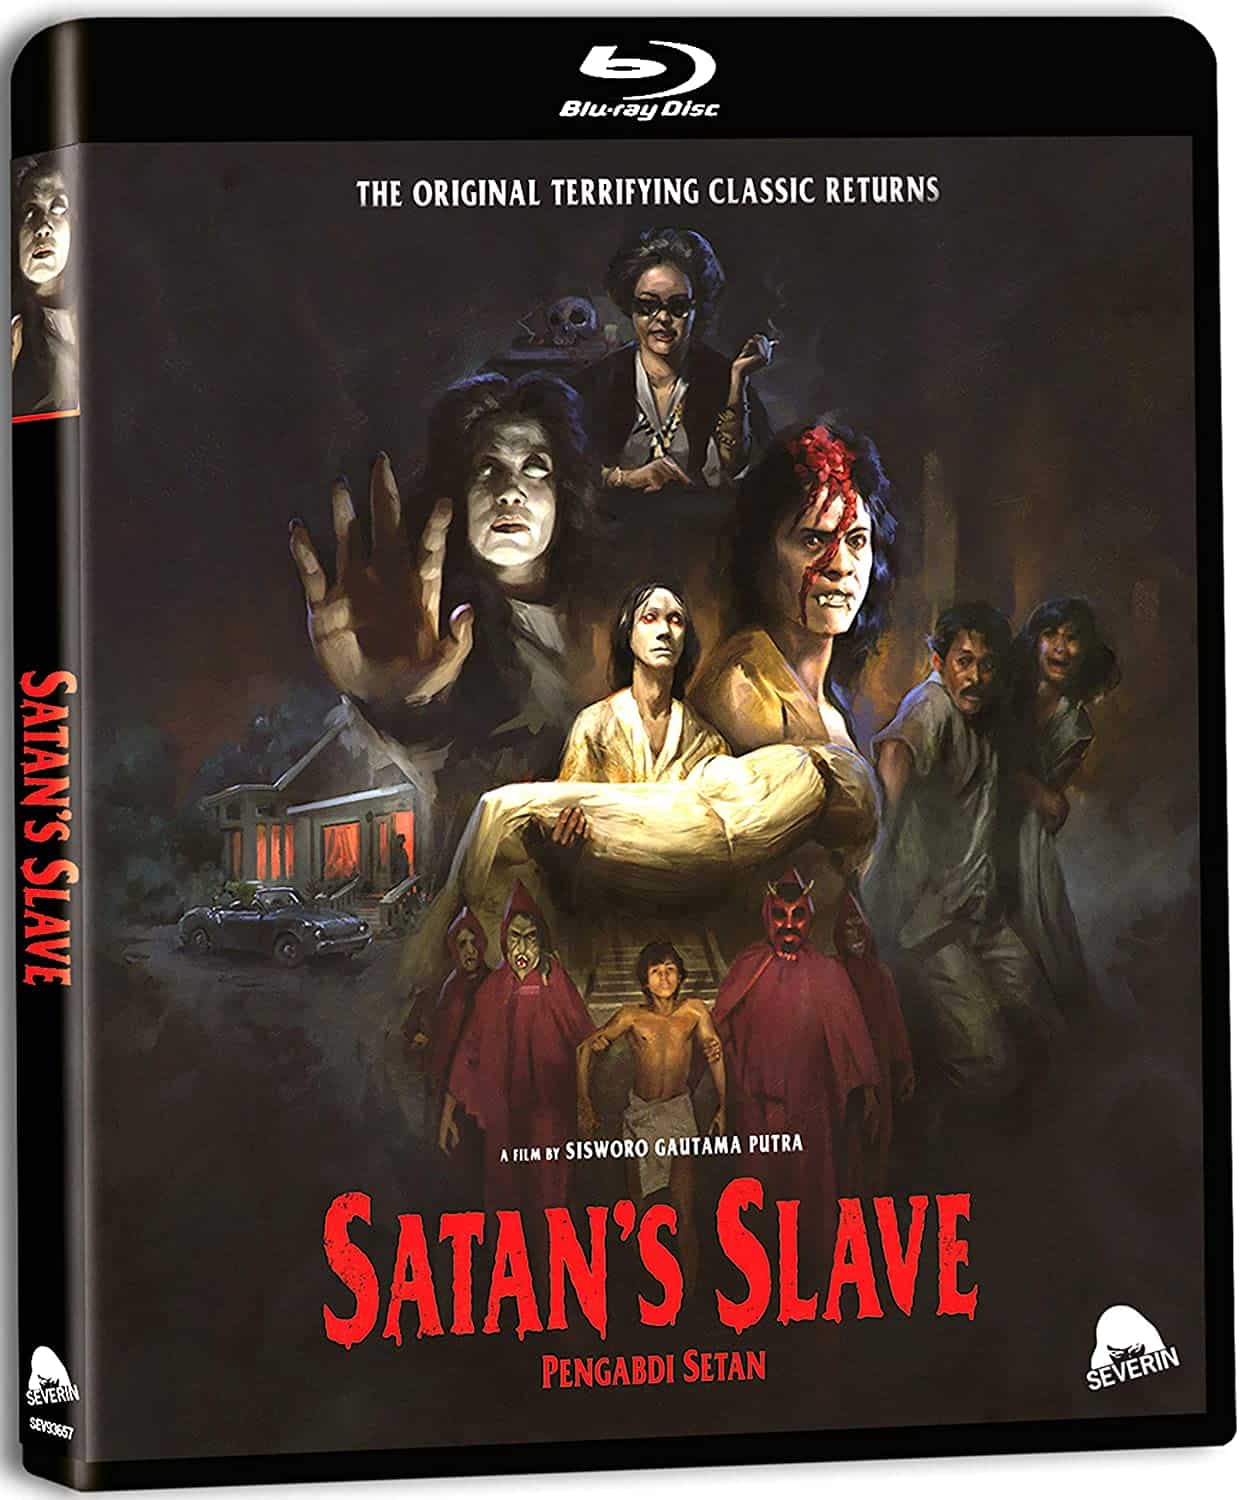 Film Review Satans Slave (1981) by